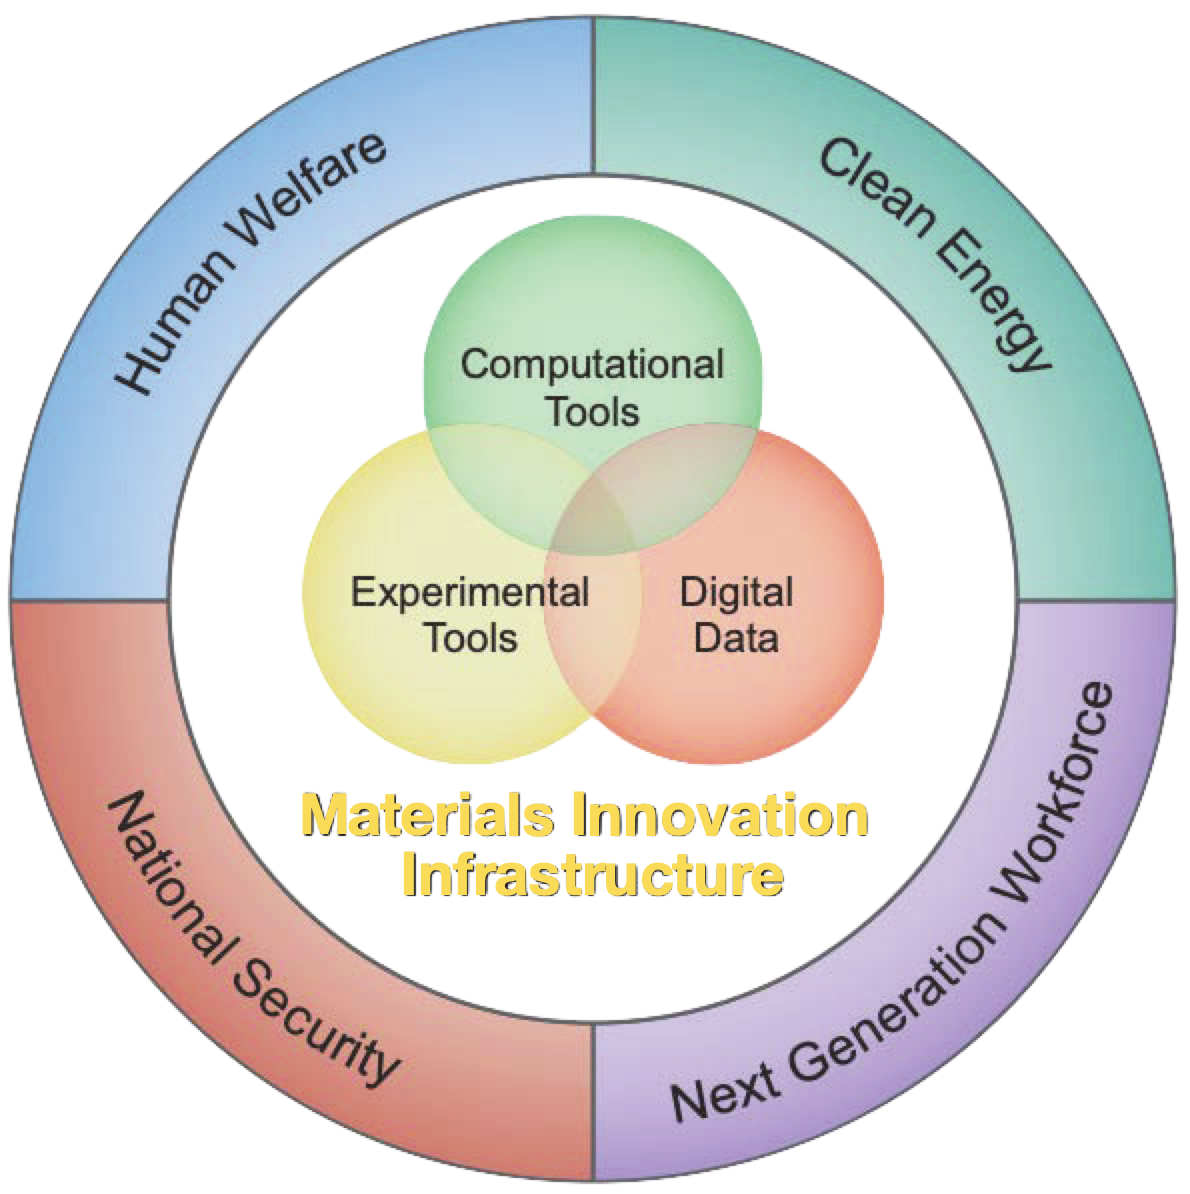 The founding conceptual structure of the Materials Innovation Infrastructure. SOURCE: National Science and Technology Council, 2021, Materials Genome Initiative Strategic Plan, A Report by the Subcommittee on the Materials Genome Initiative Committee on Technology, Washington, DC: Executive Office of the President, https://www.mgi.gov/sites/default/files/documents/MGI-2021-Strategic-Plan.pdf. Courtesy of the Materials Genome Initiative.